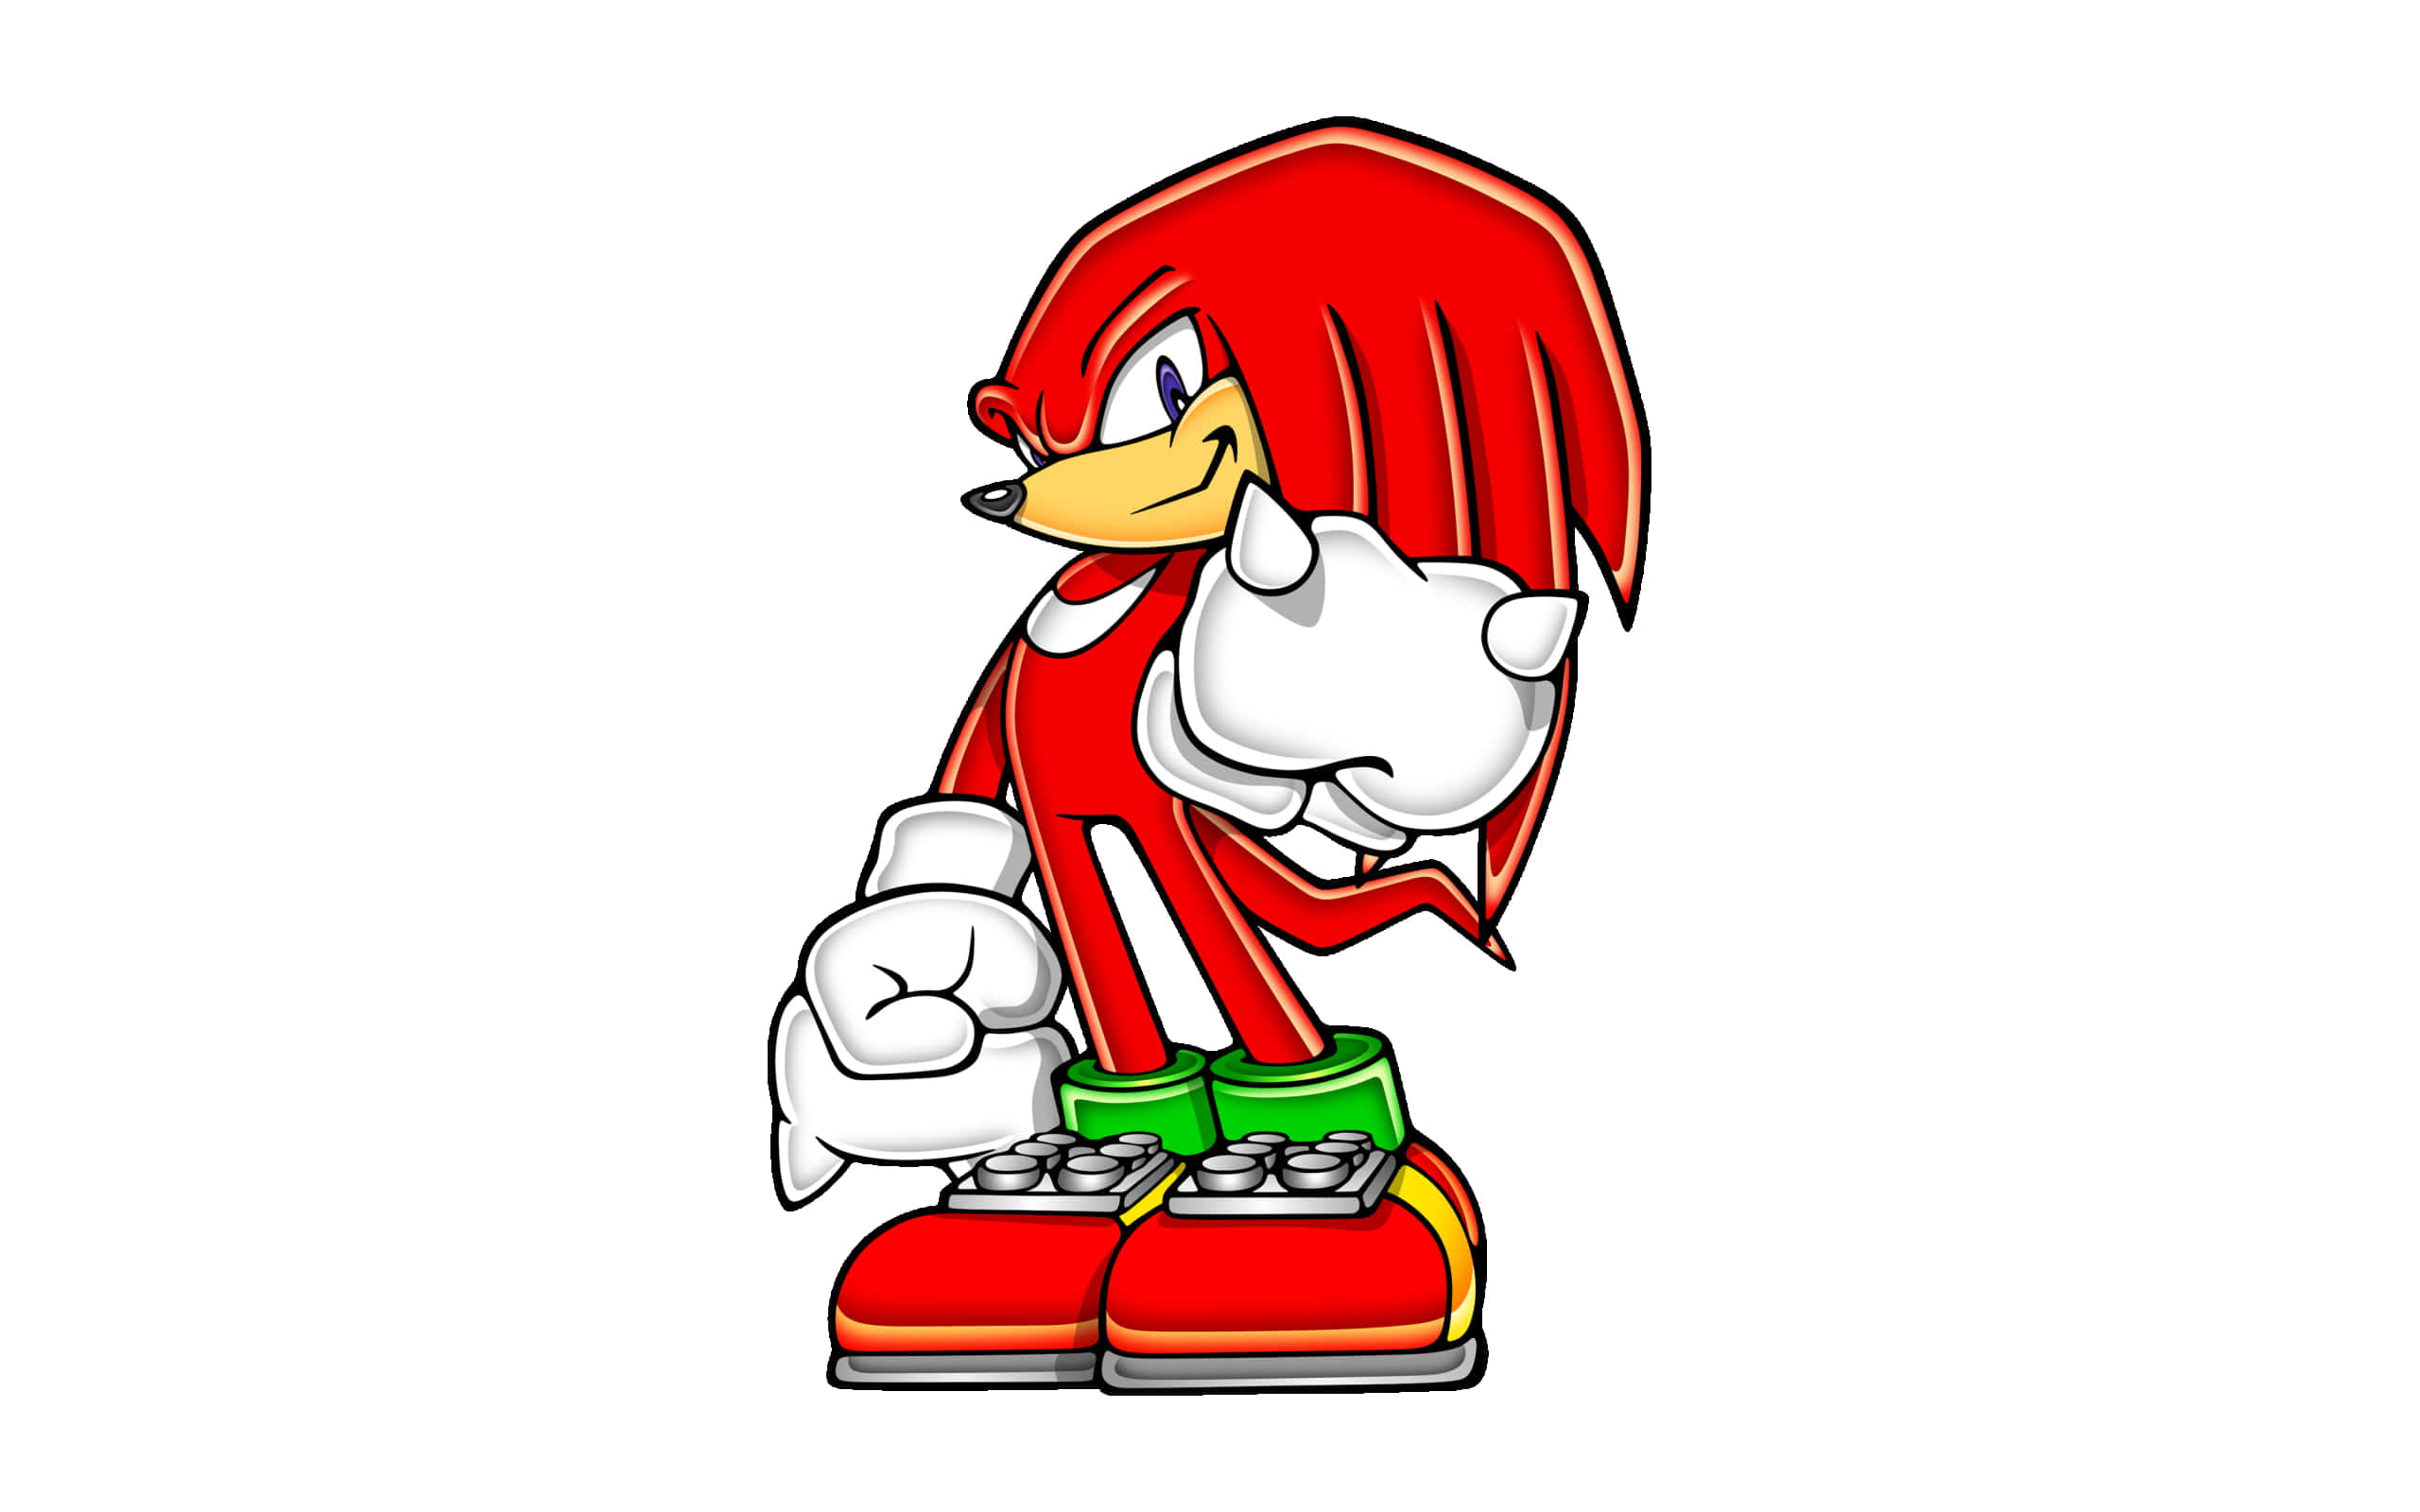 Sonic The Hedgehog Cartoon Character With Red Hair